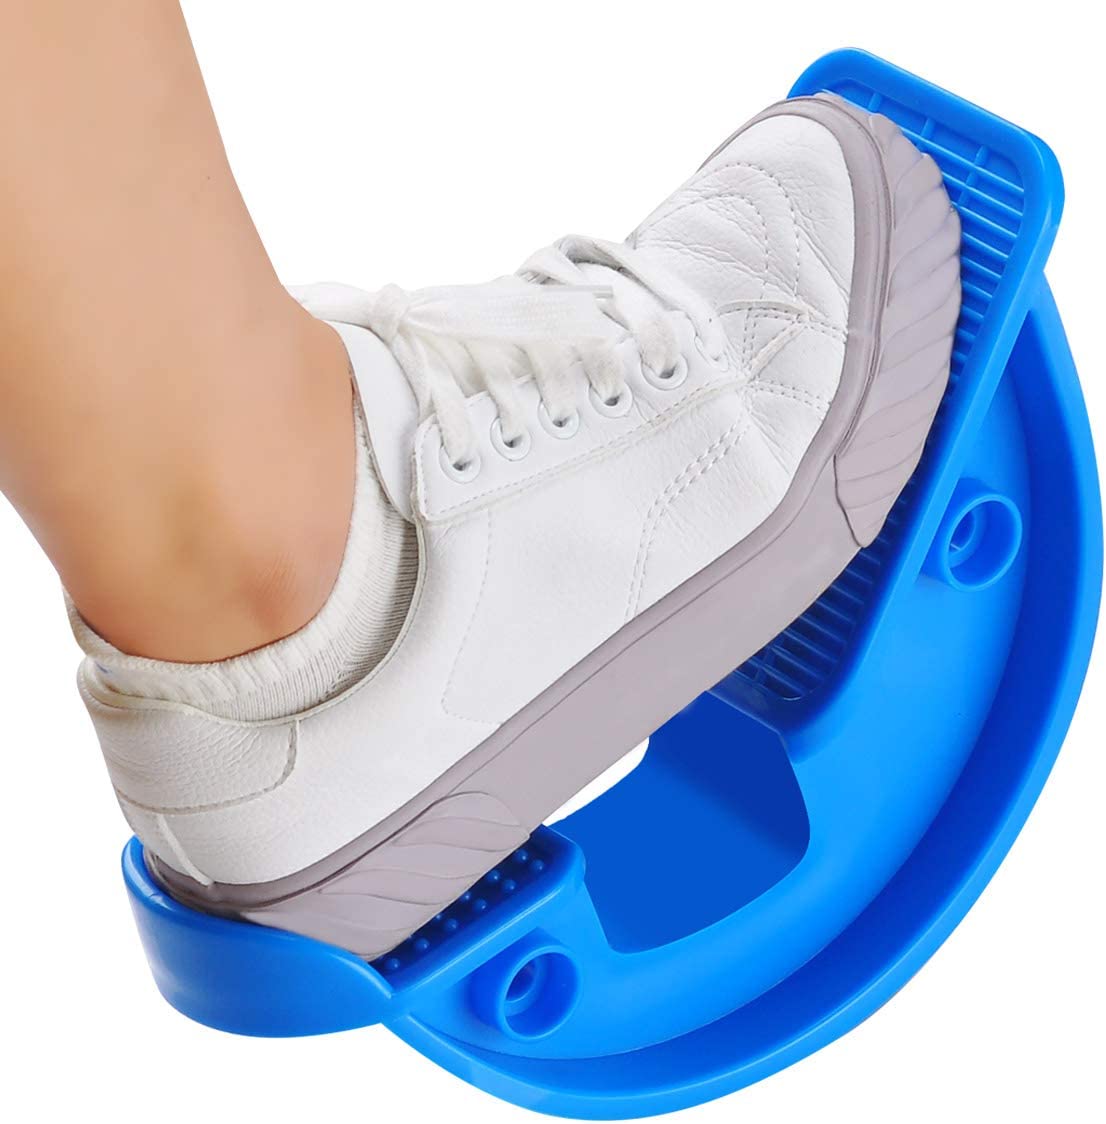 View Plantar Fasciitis and Achilles Foot Stretcher